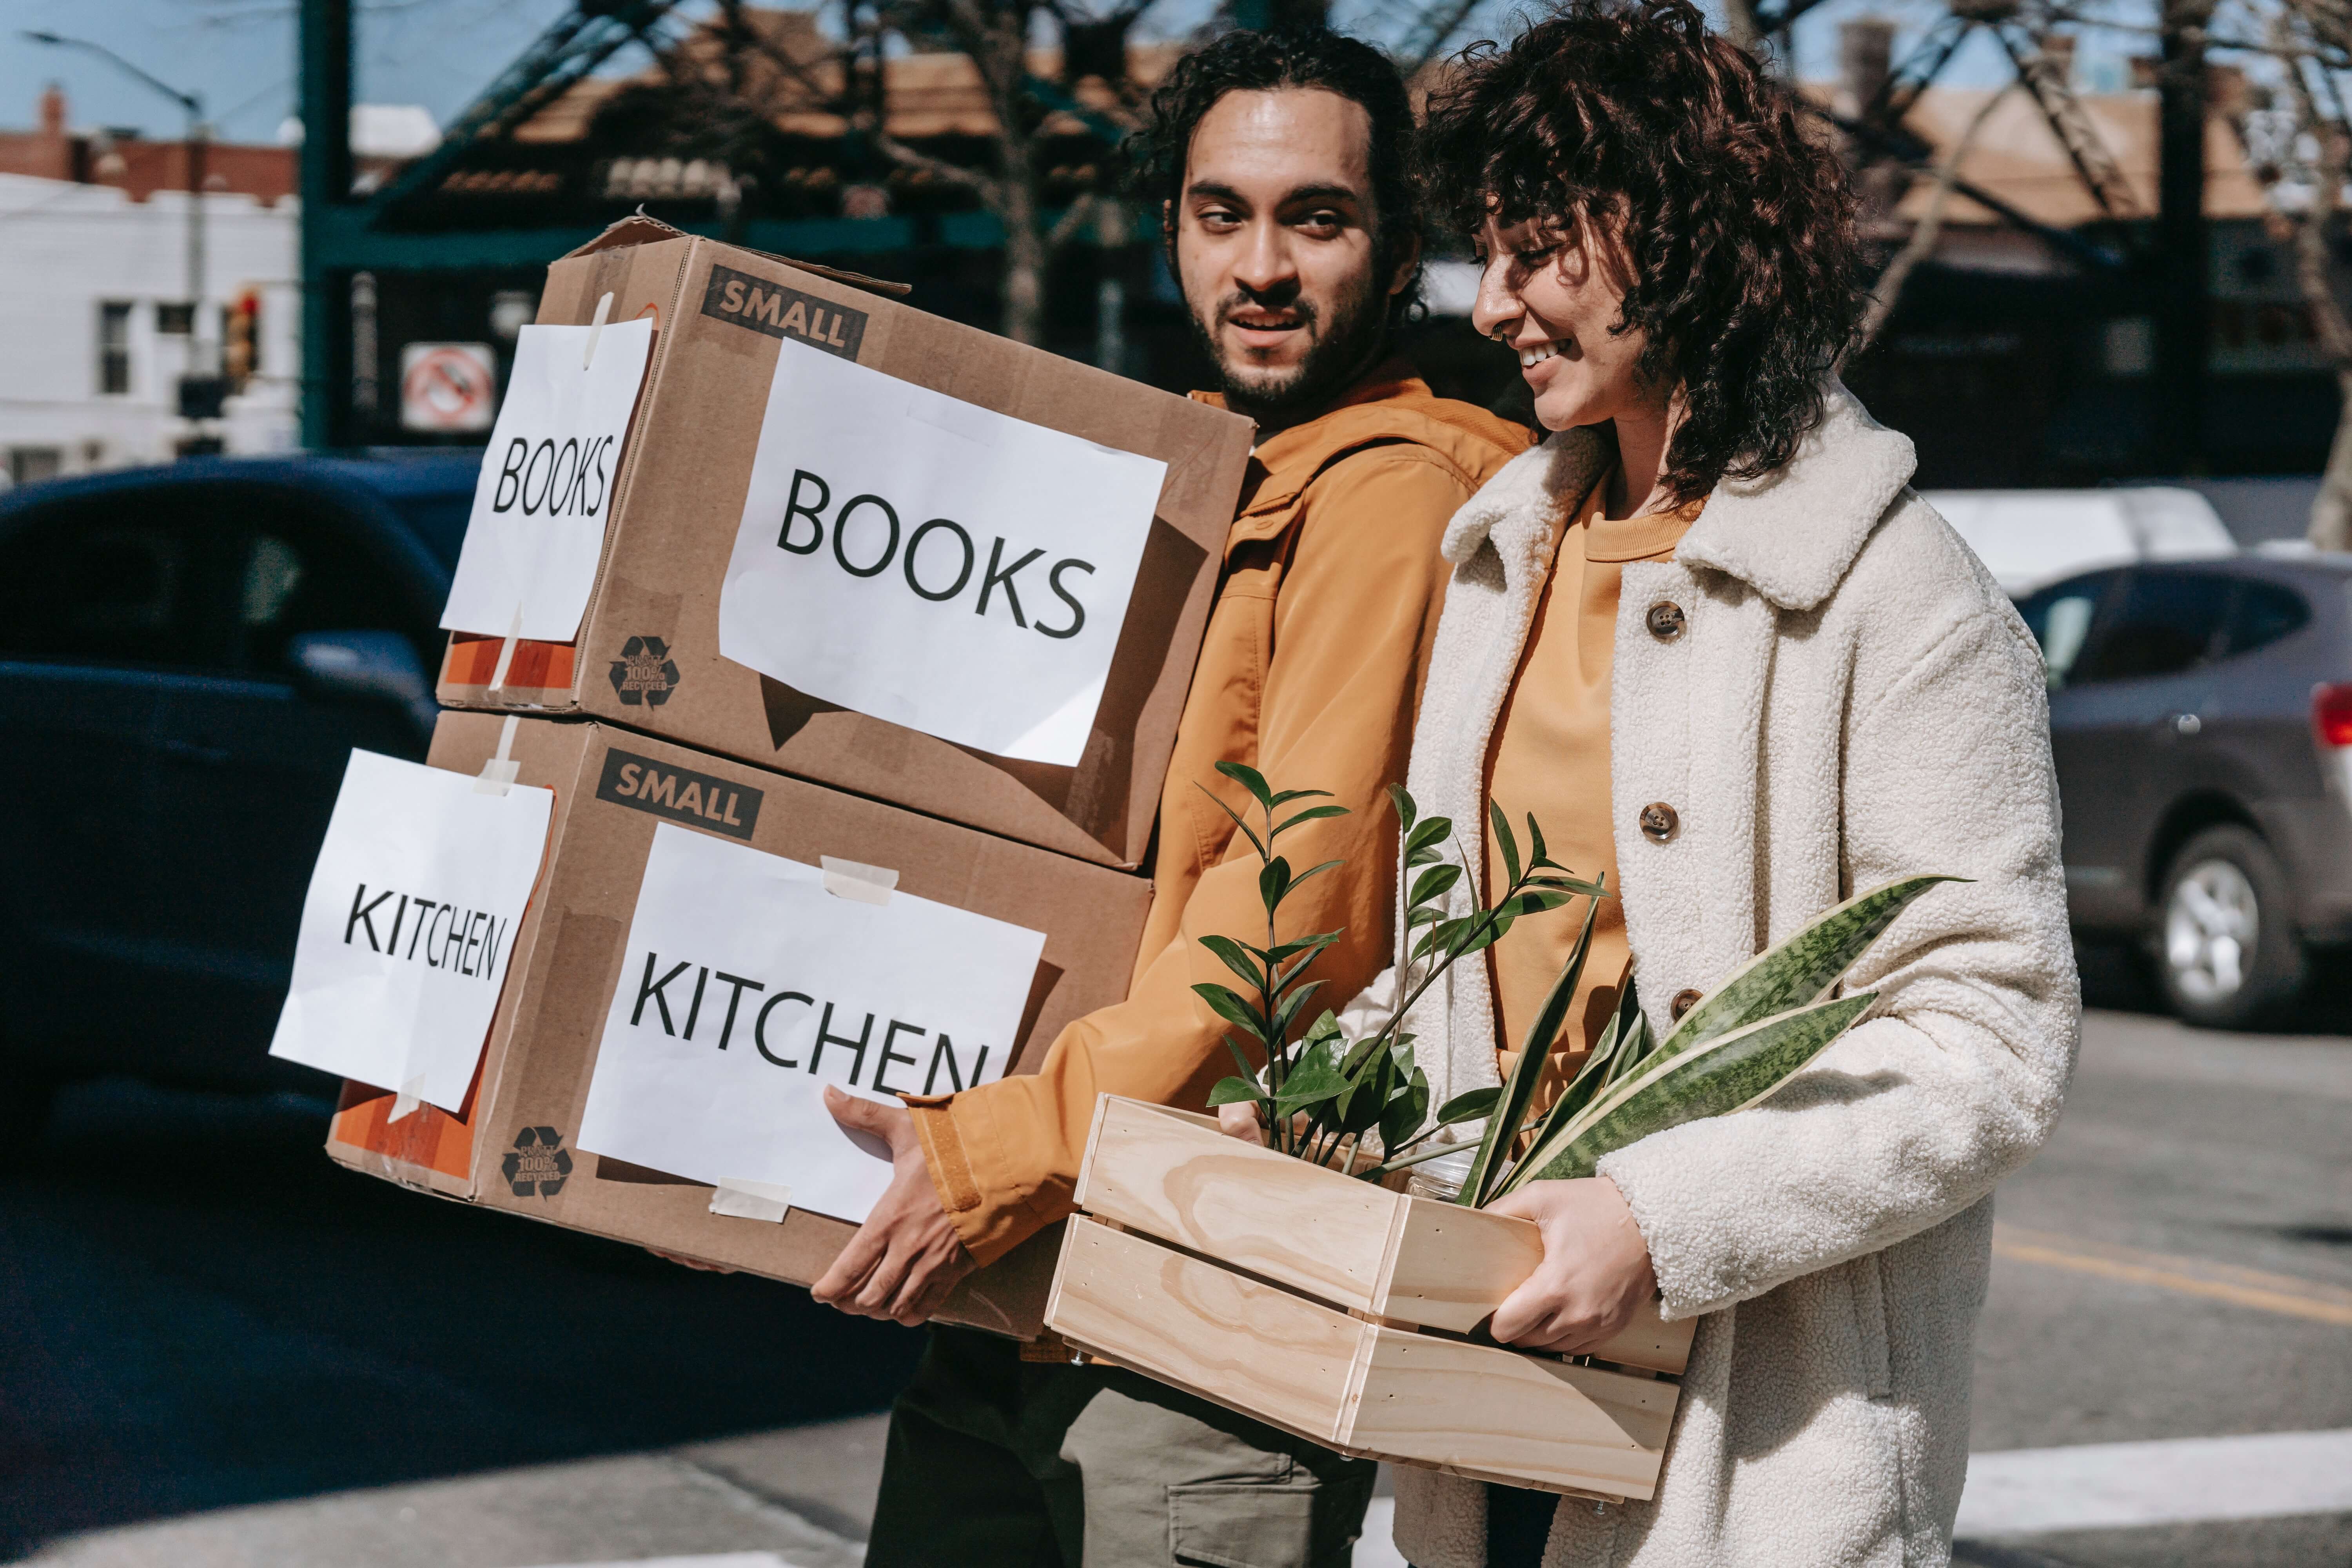 couple-carrying-books-kitchen-boxes-together.jpg